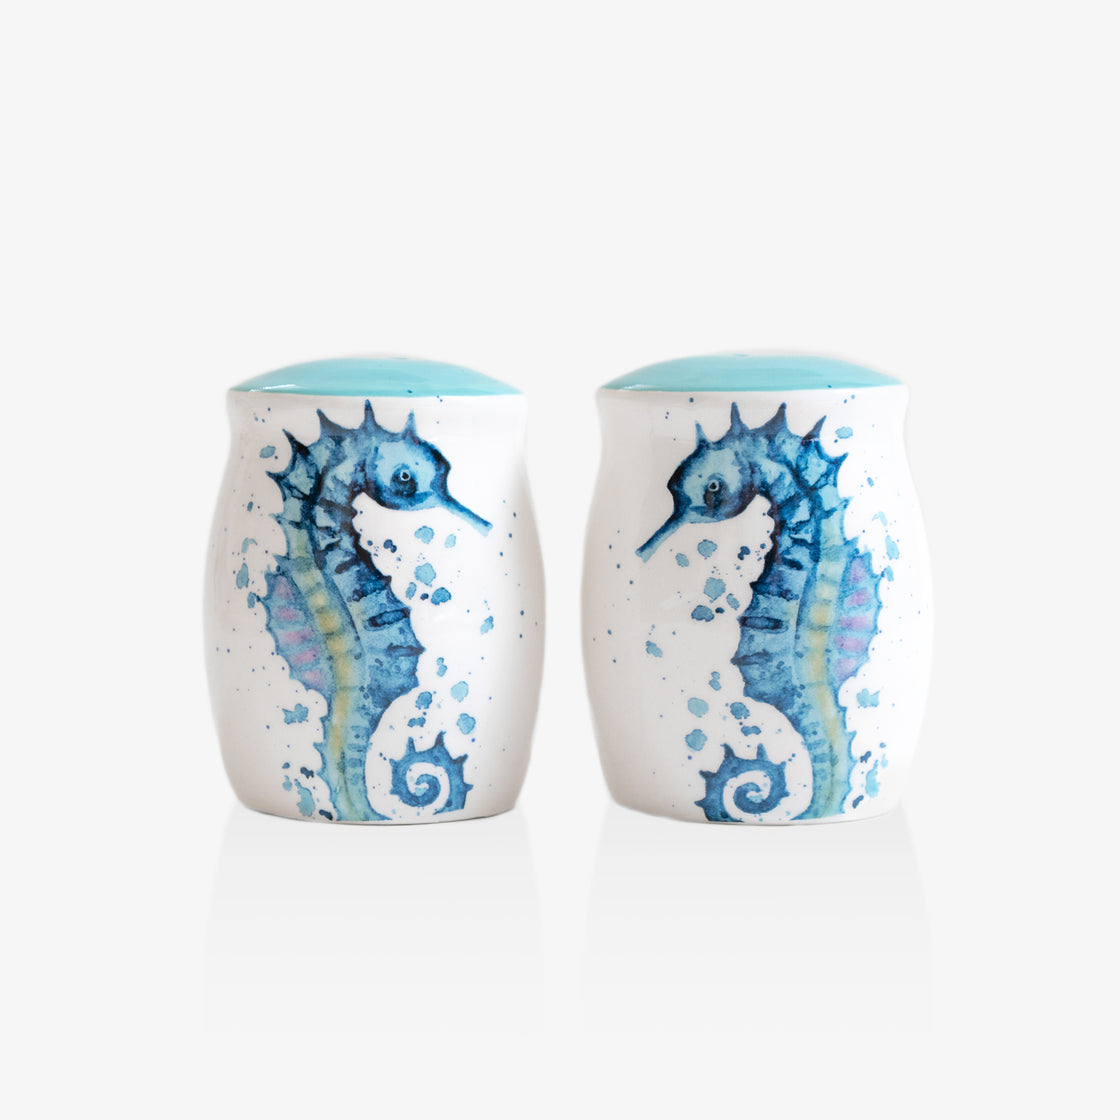 An up-close perspective of the Rengora seahorse salt and pepper shakers against a plain white background.